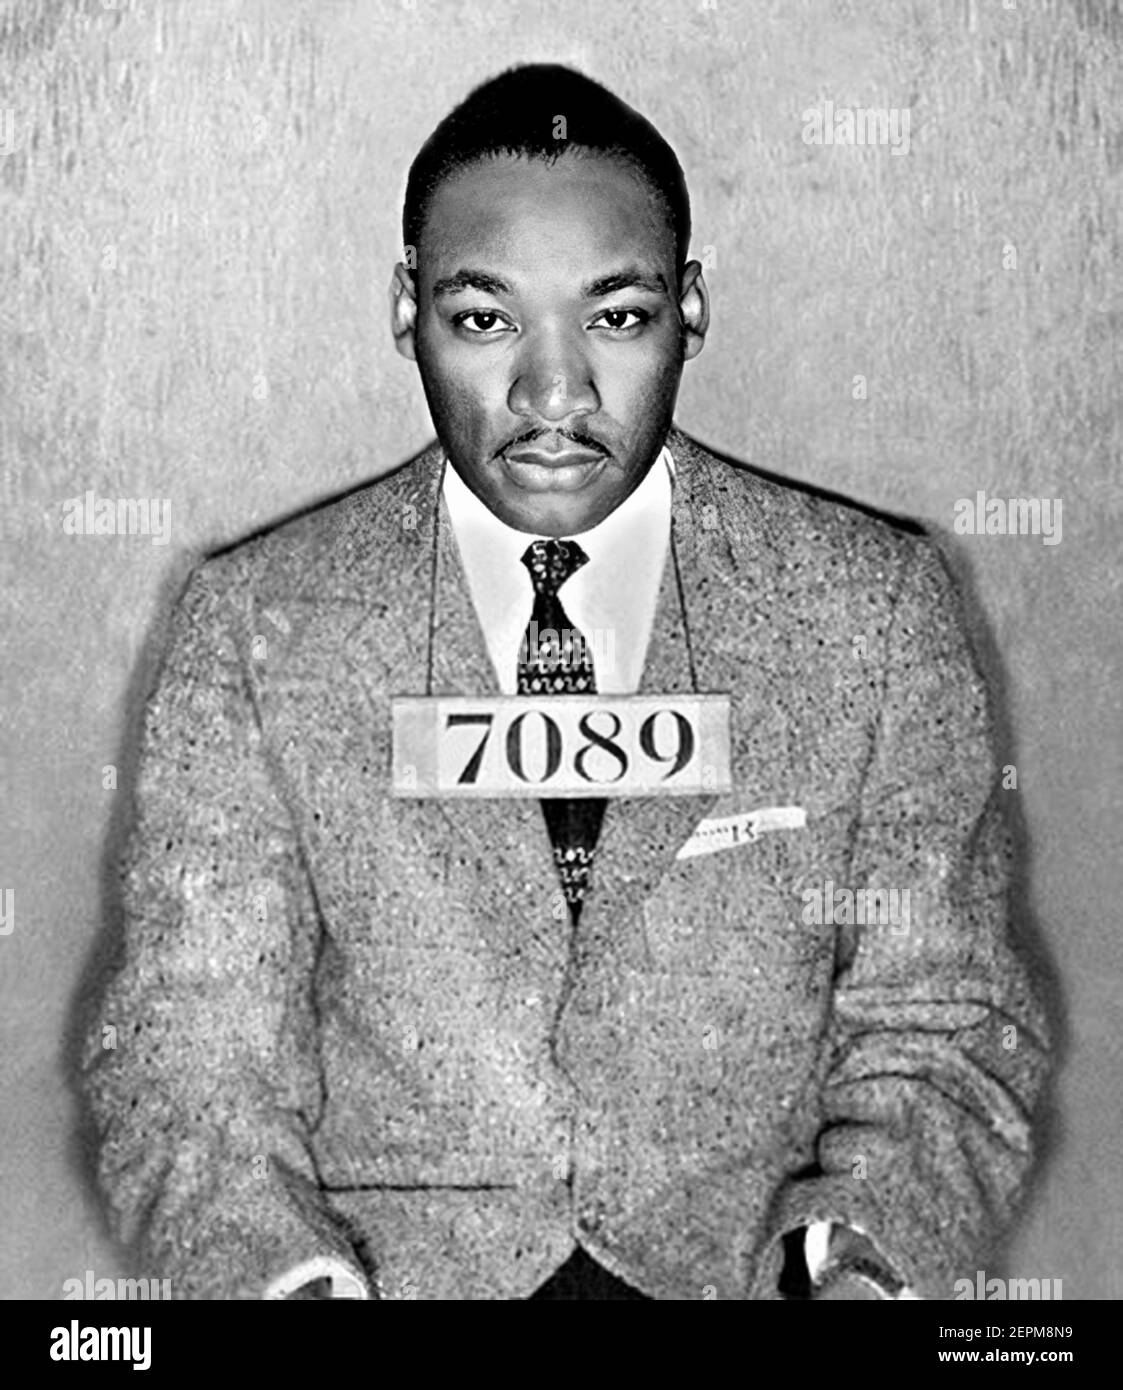 1956 , 22 february, Montgomery , Alabama , USA :  Mugshot of activist in the civil rights movement MARTIN LUTHER KING ( 1929 - 1968 ), taken following his arrest with activist ROSA PARKS ( 1913 - 2005 )for disorderly conduct in Montgomery in February 1956 . Parks and several other city residents were arrested for their participation in the Montgomery Bus Boycott , a key early campaign of the civil rights movement . - FOTO SEGNALETICA - portrait - ritratto - DIRITTI CIVILI - CIVIL RIGHTS - AFROAMERICANI - AFROAMERICANS - Afro Americani - Afro americans - ATTIVISTA - abolizione separazionismo ap Stock Photo